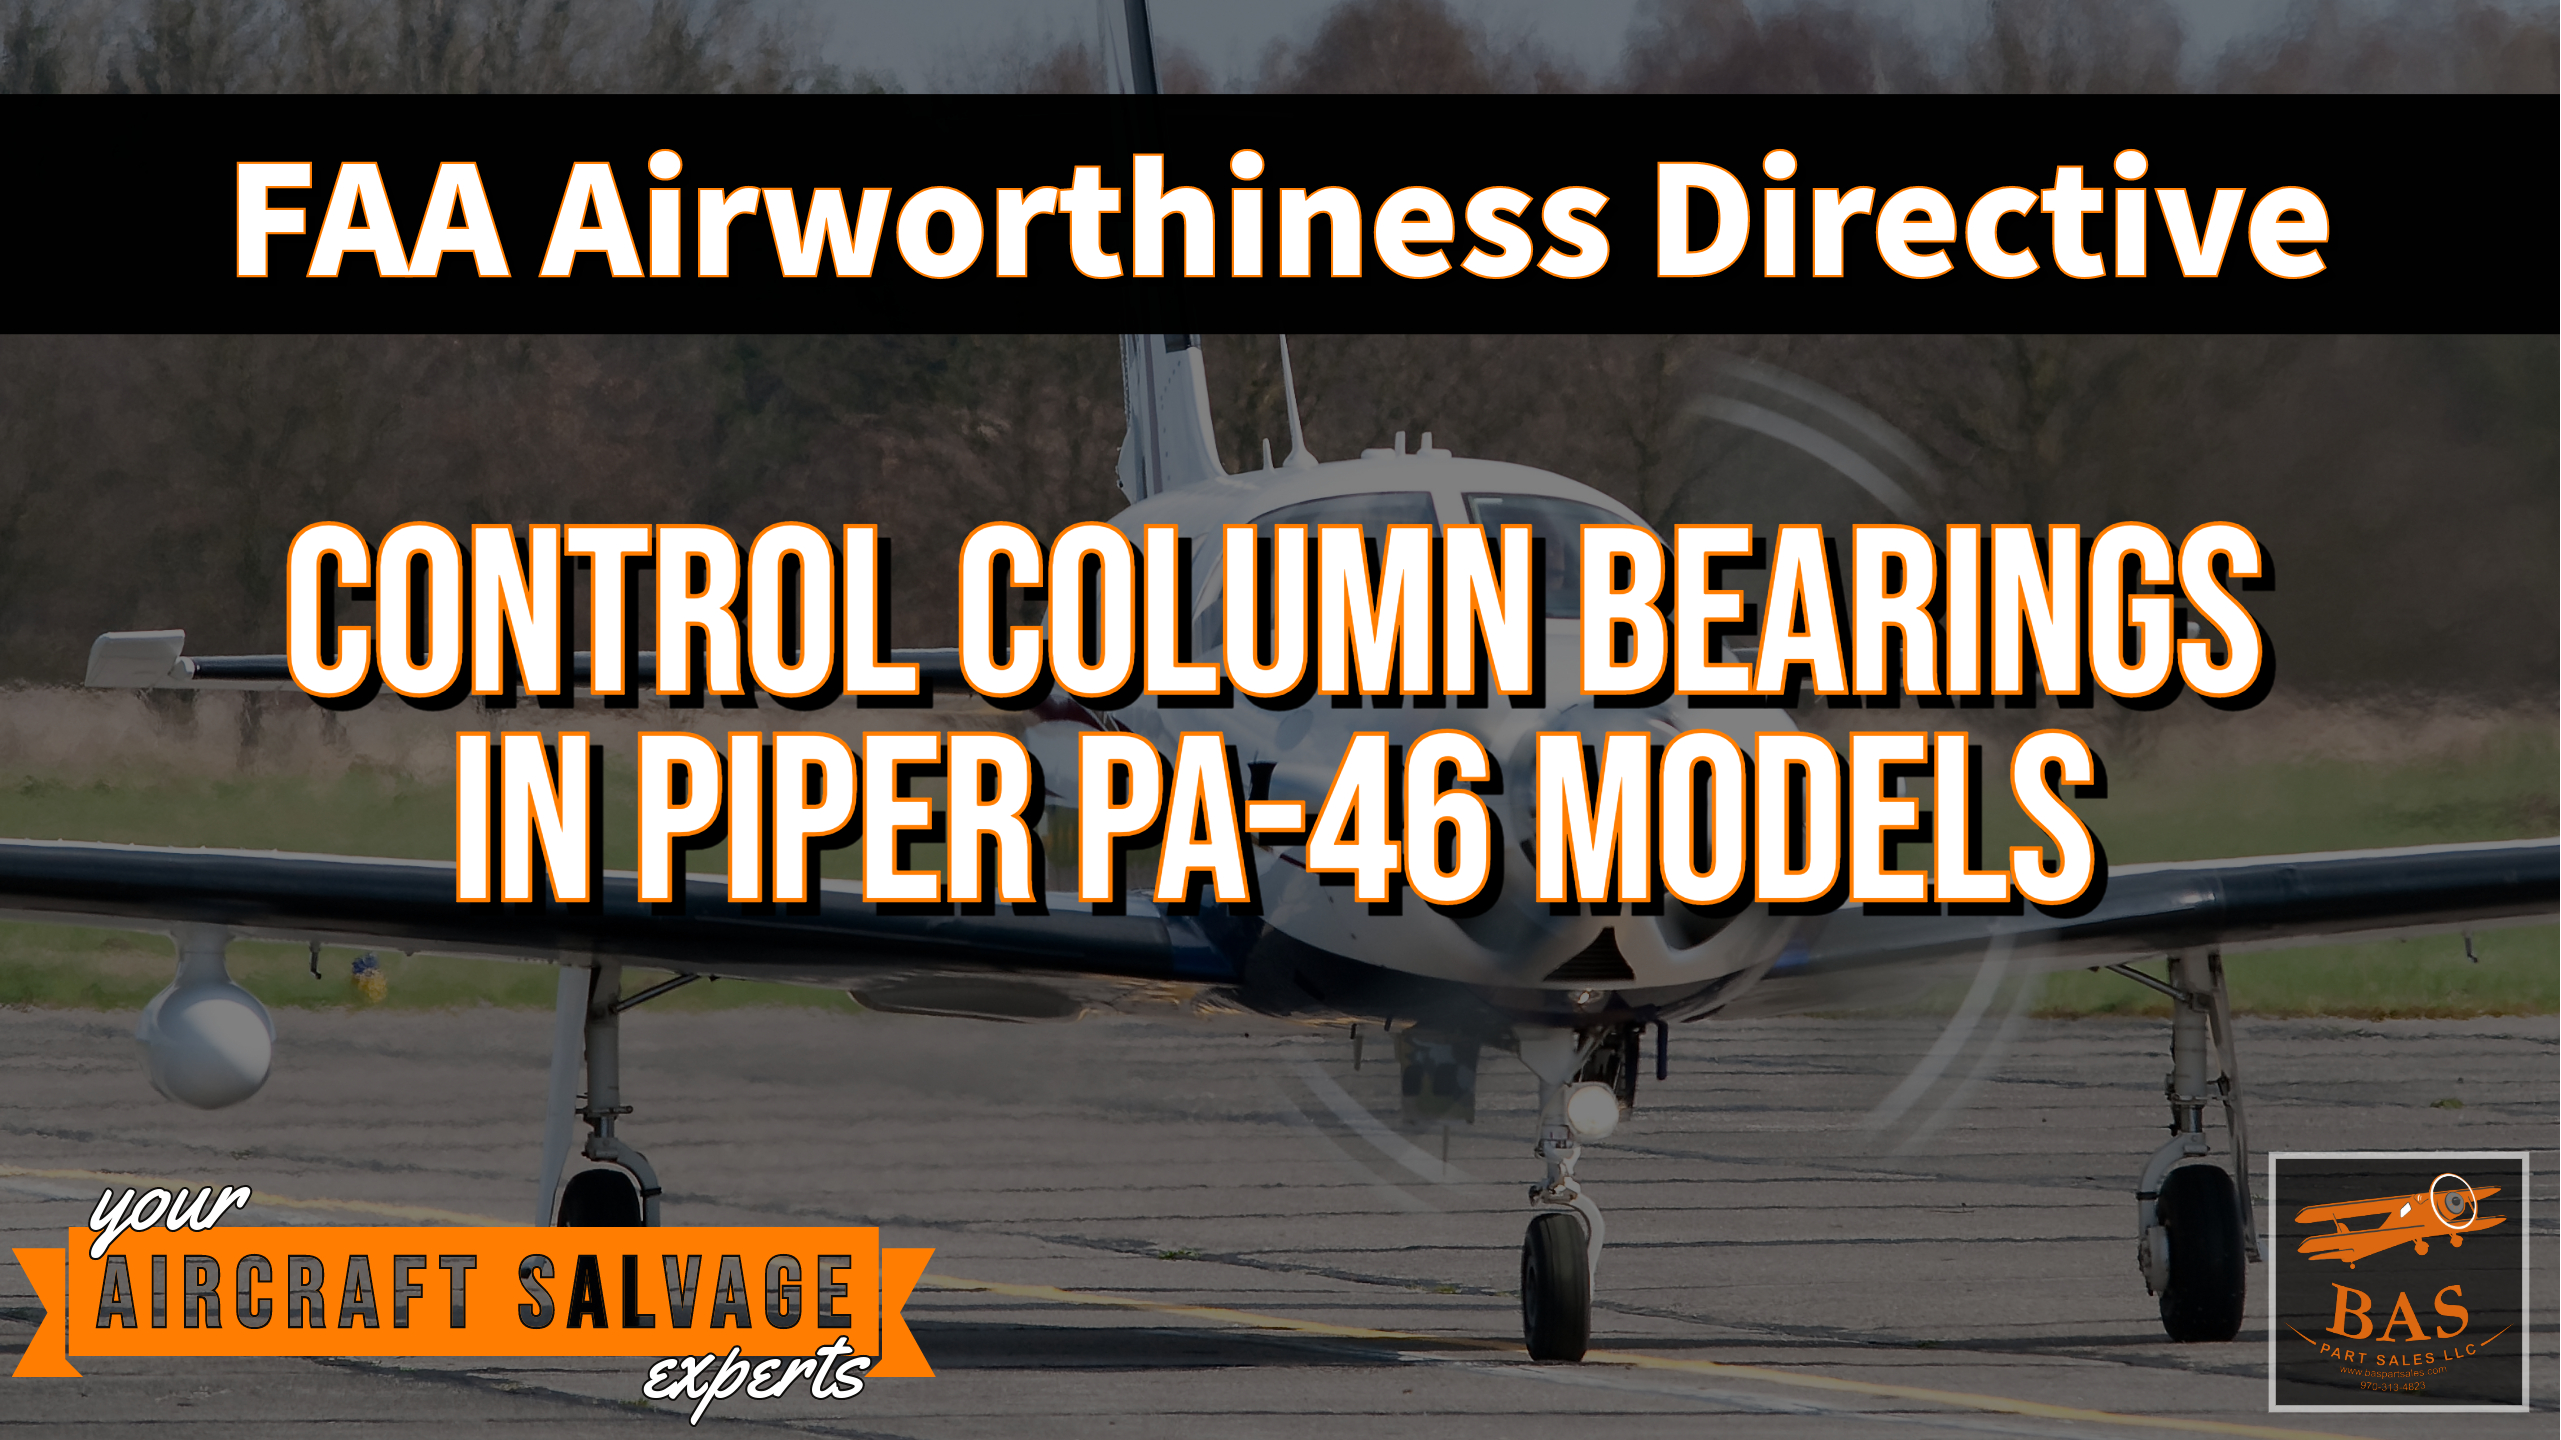 FAA AD for Piper PA-46 Models